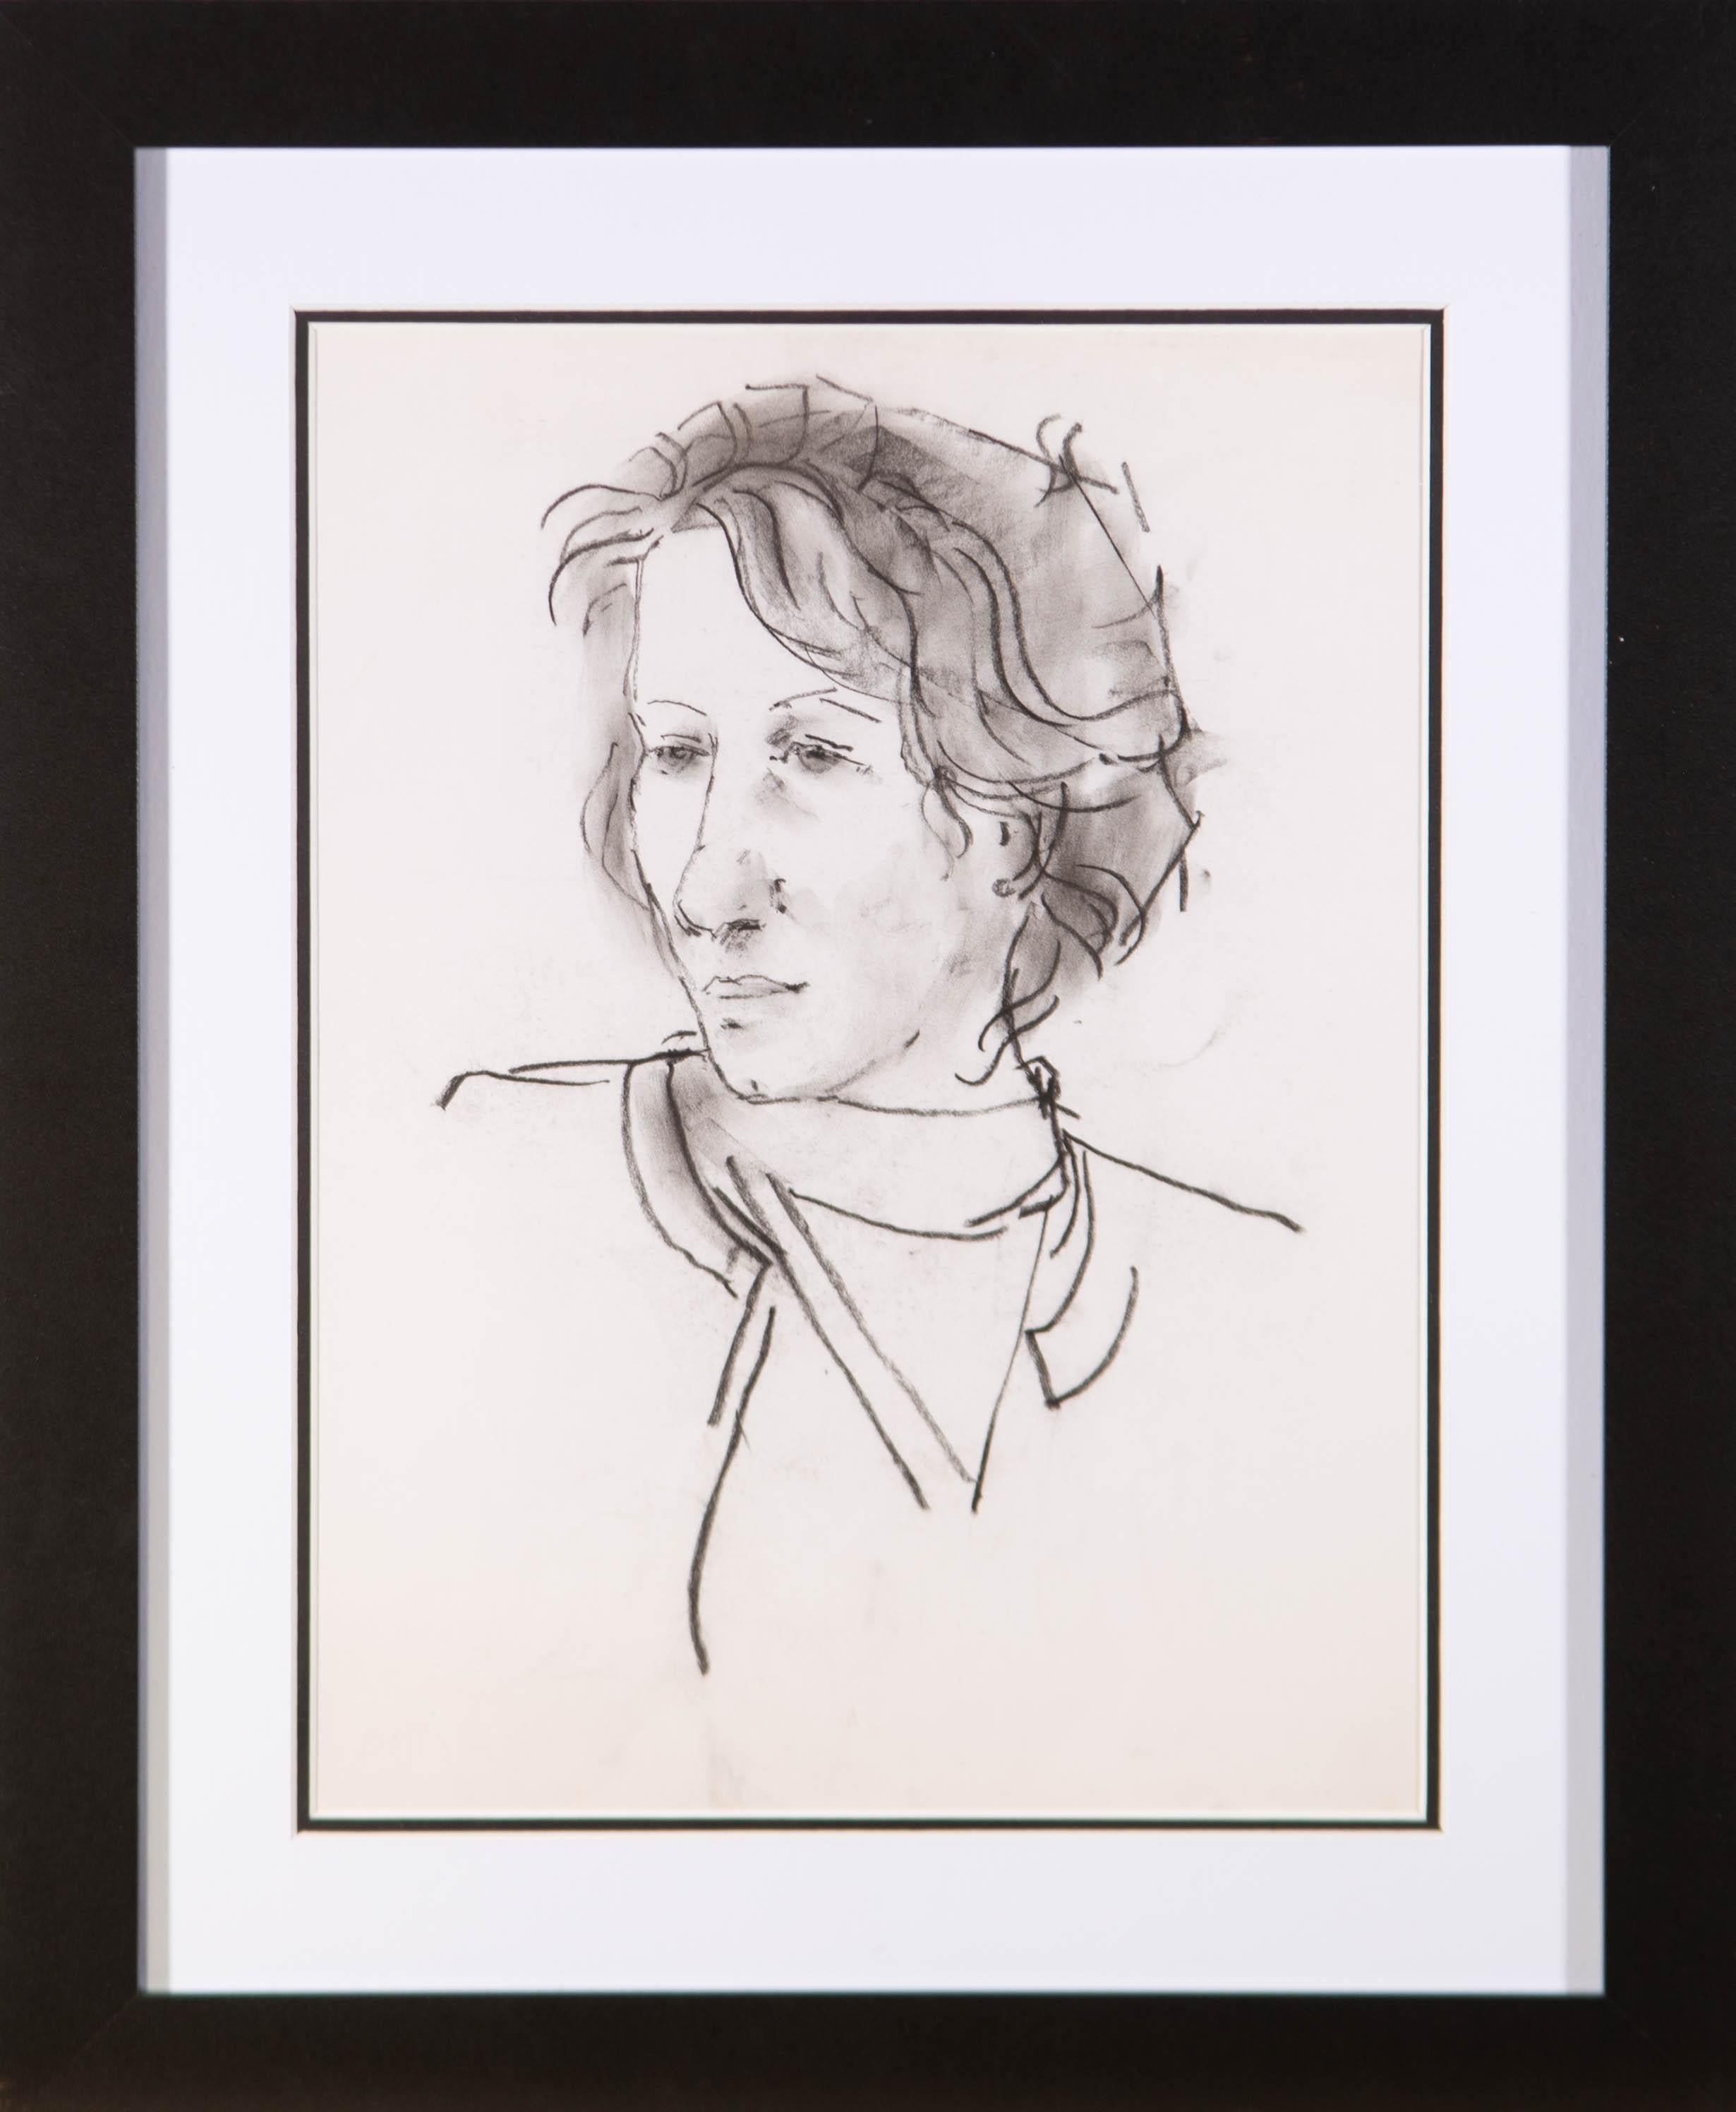 A charming charcoal drawing by the artist Peter Collins, depicting a study of a short-haired woman. Unsigned. Well-presented in a white on black double card mount and in a simple contemporary black frame. On wove.
